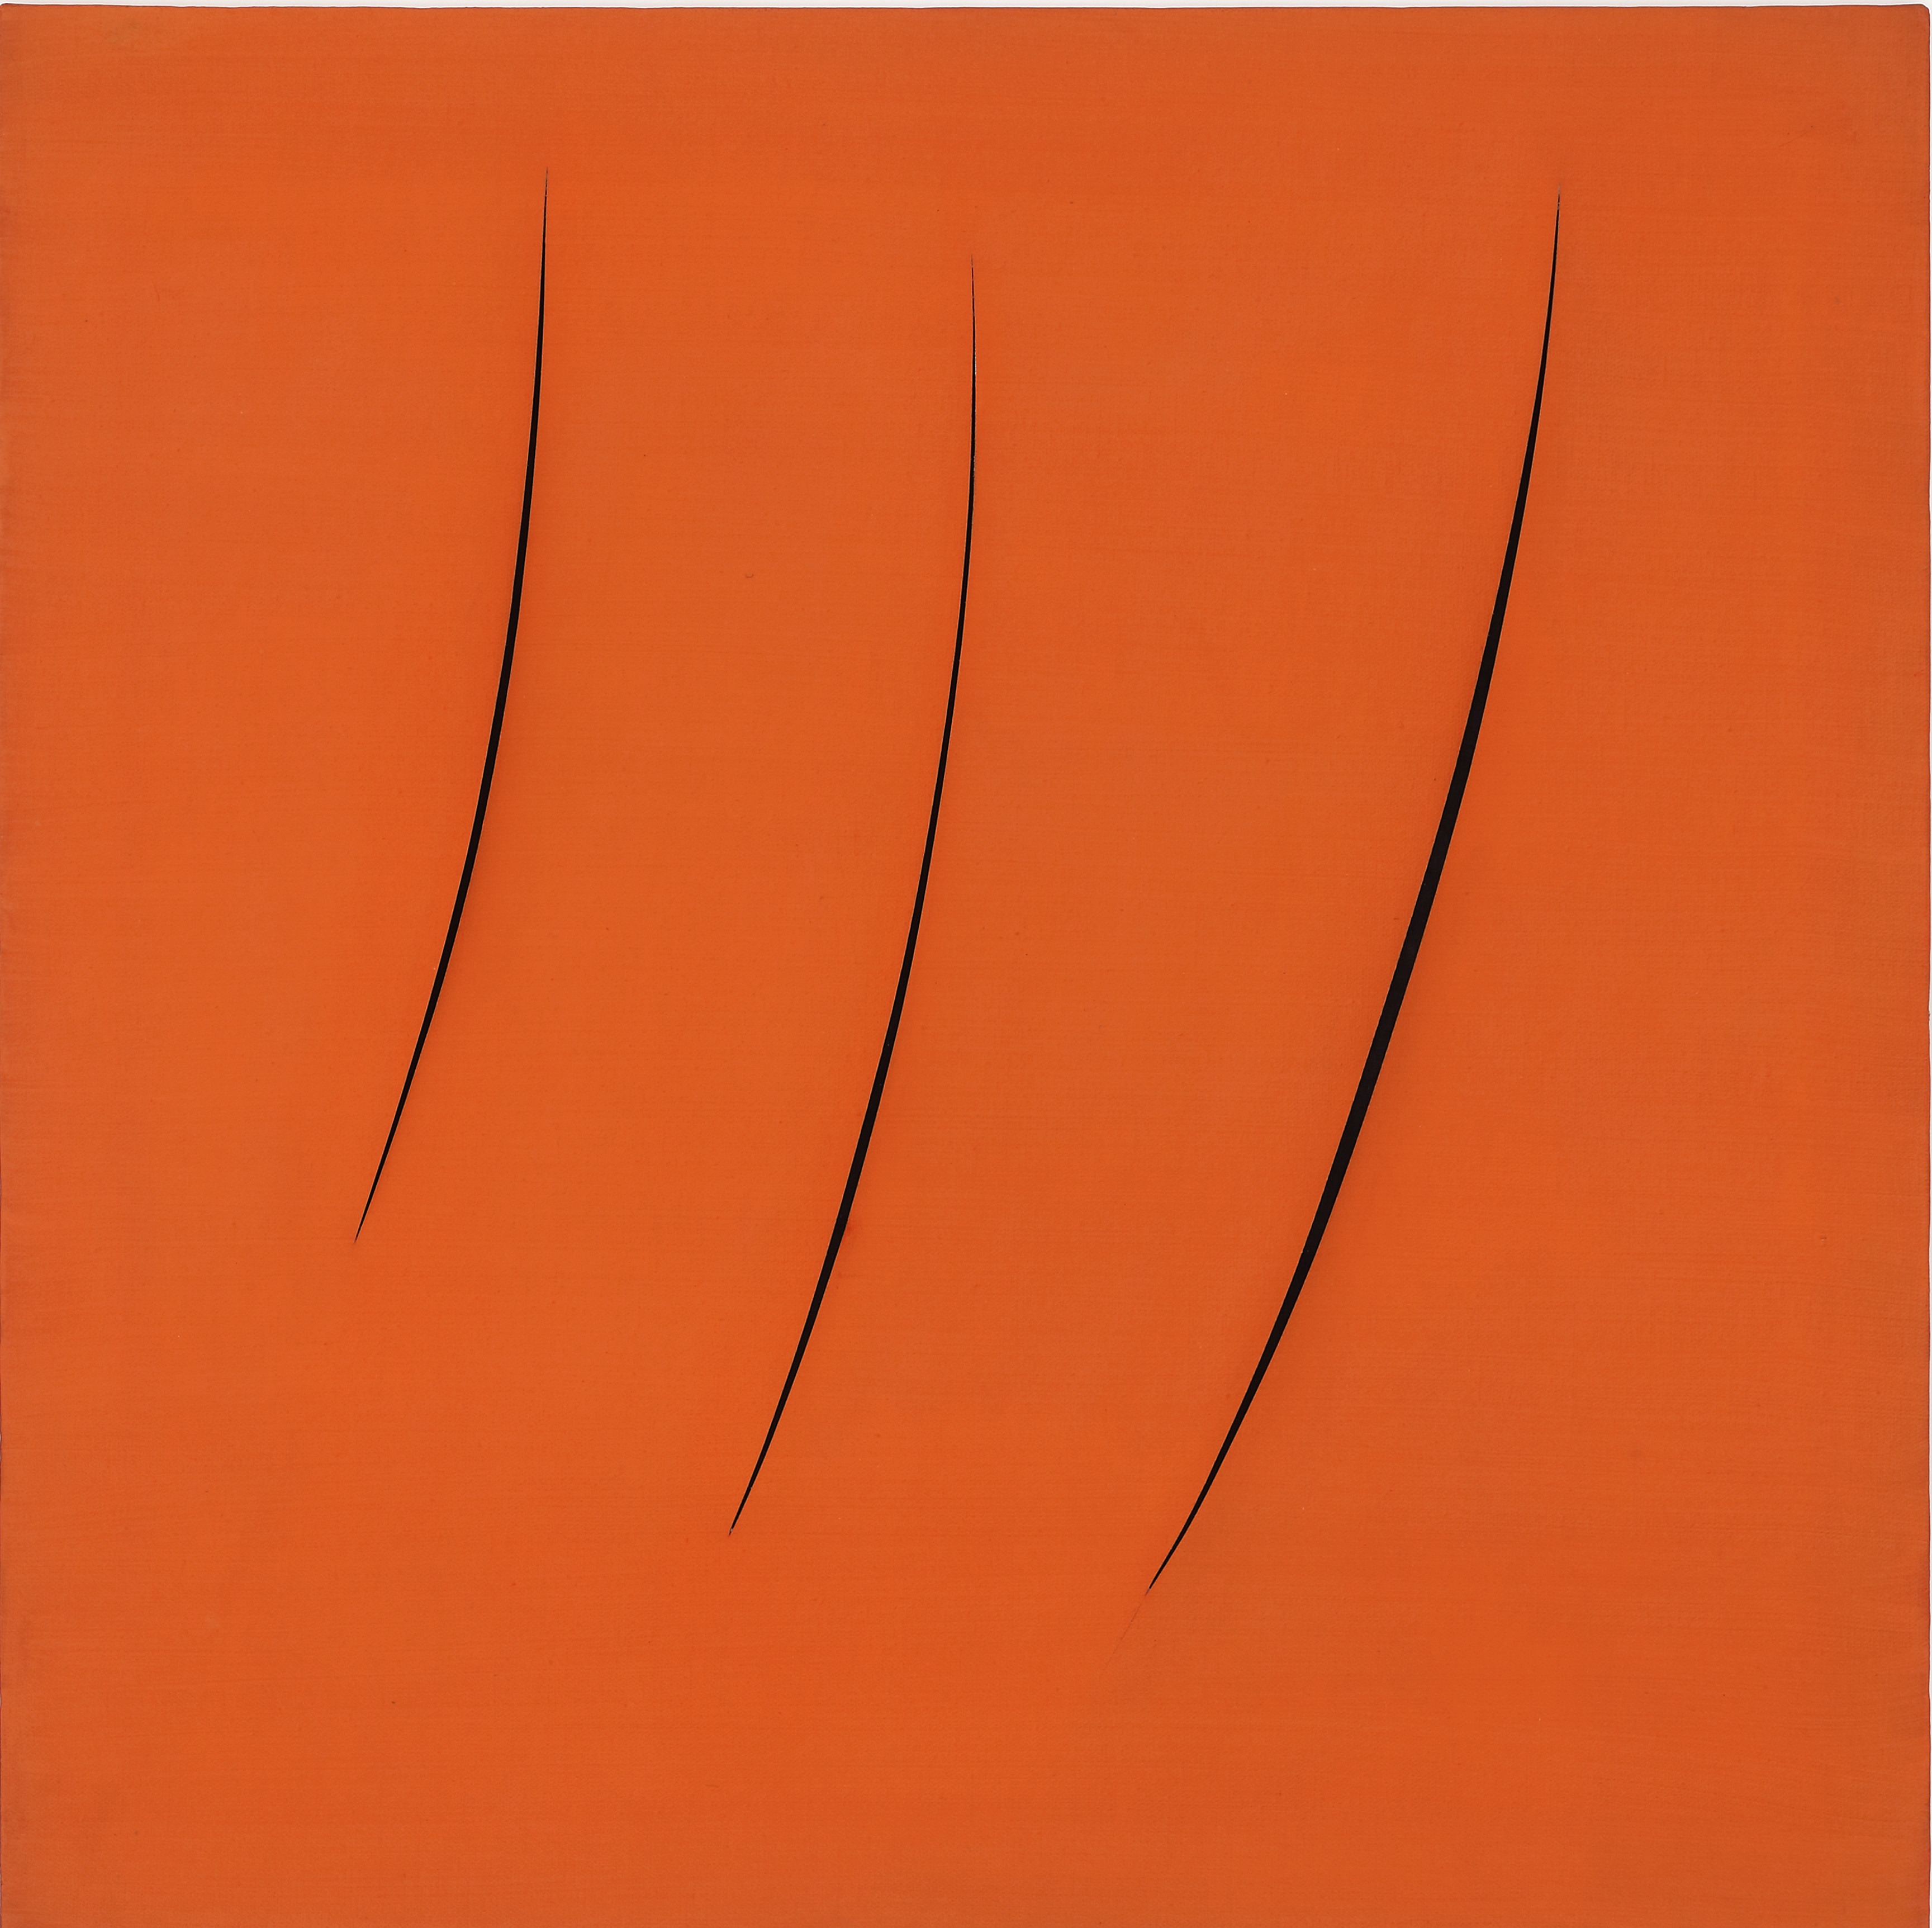 CONCETTO SPAZIALE. ATTESE 1959 Oil on canvas 90.8 × 90.8 cm Copyright : Olnick Spanu Collection, New York